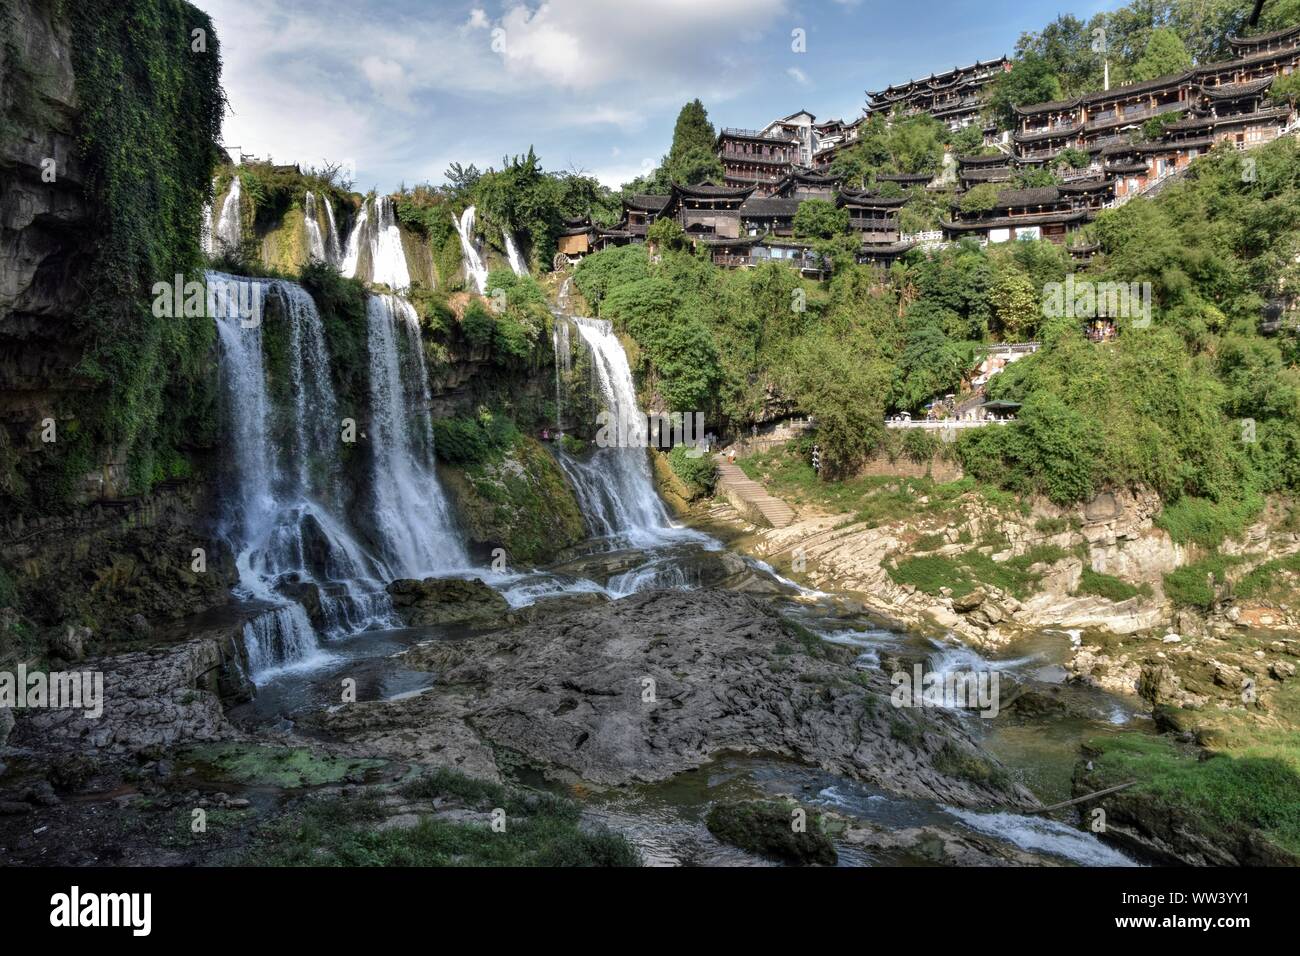 Picturesque ancient town in Hunan province in China - Hibiscus town and its  spectacular Furong Waterfall. Stock Photo